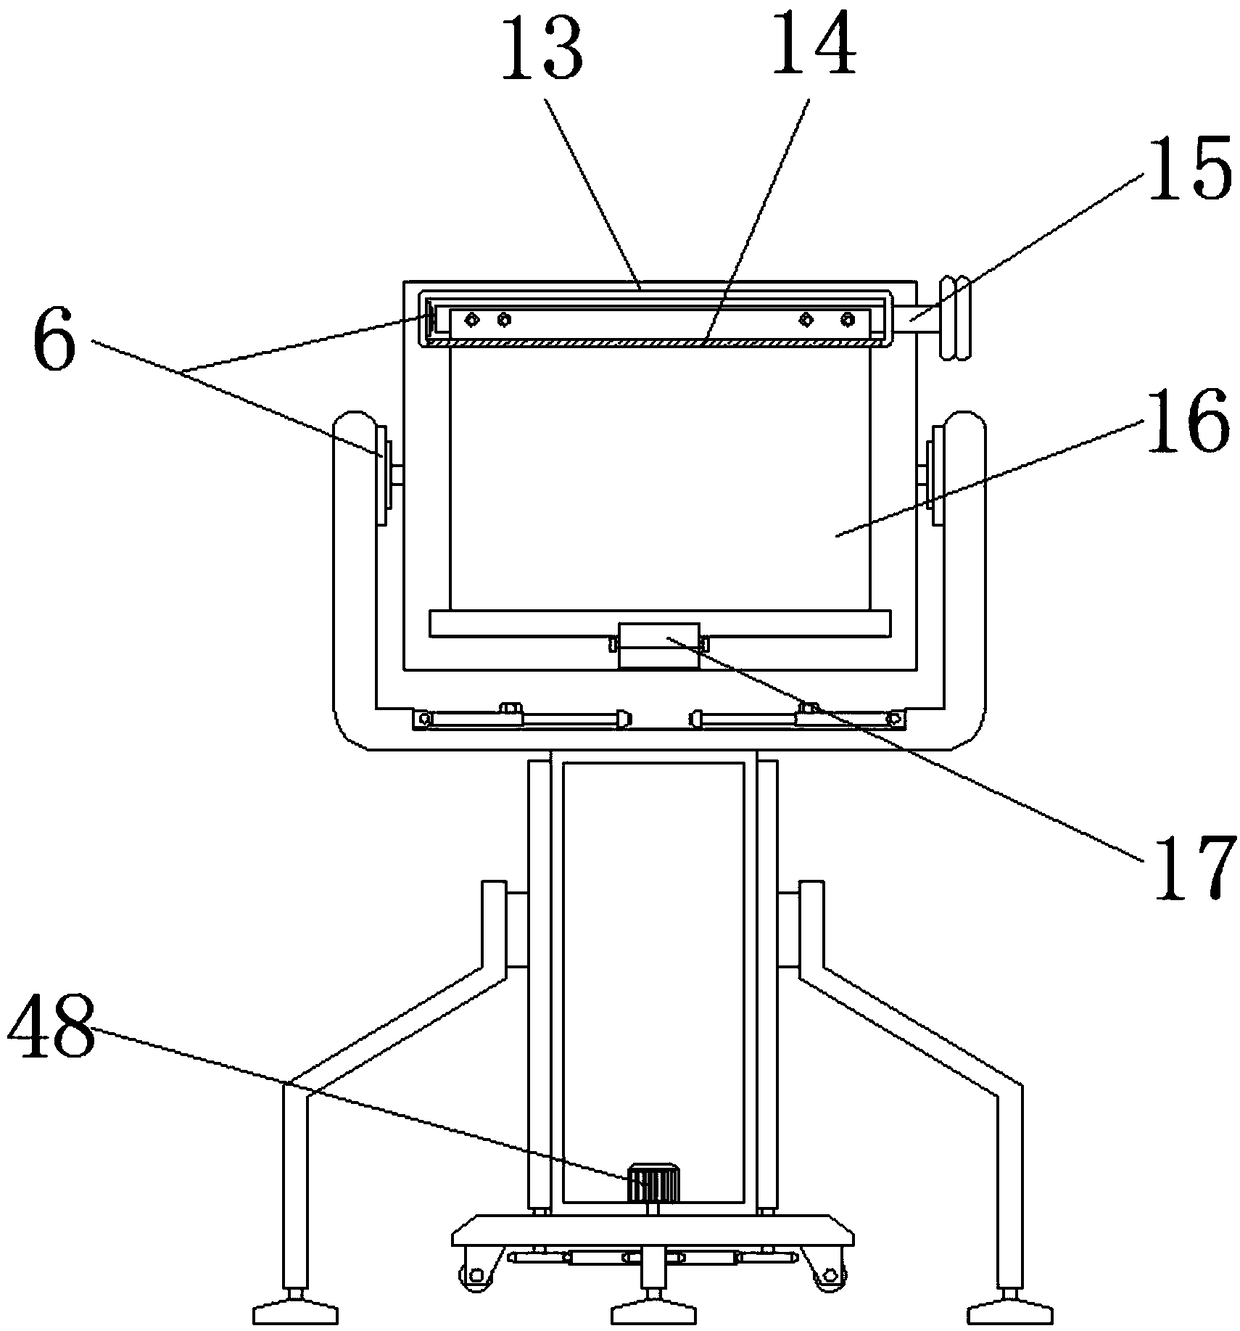 Urban and rural planning layout display device